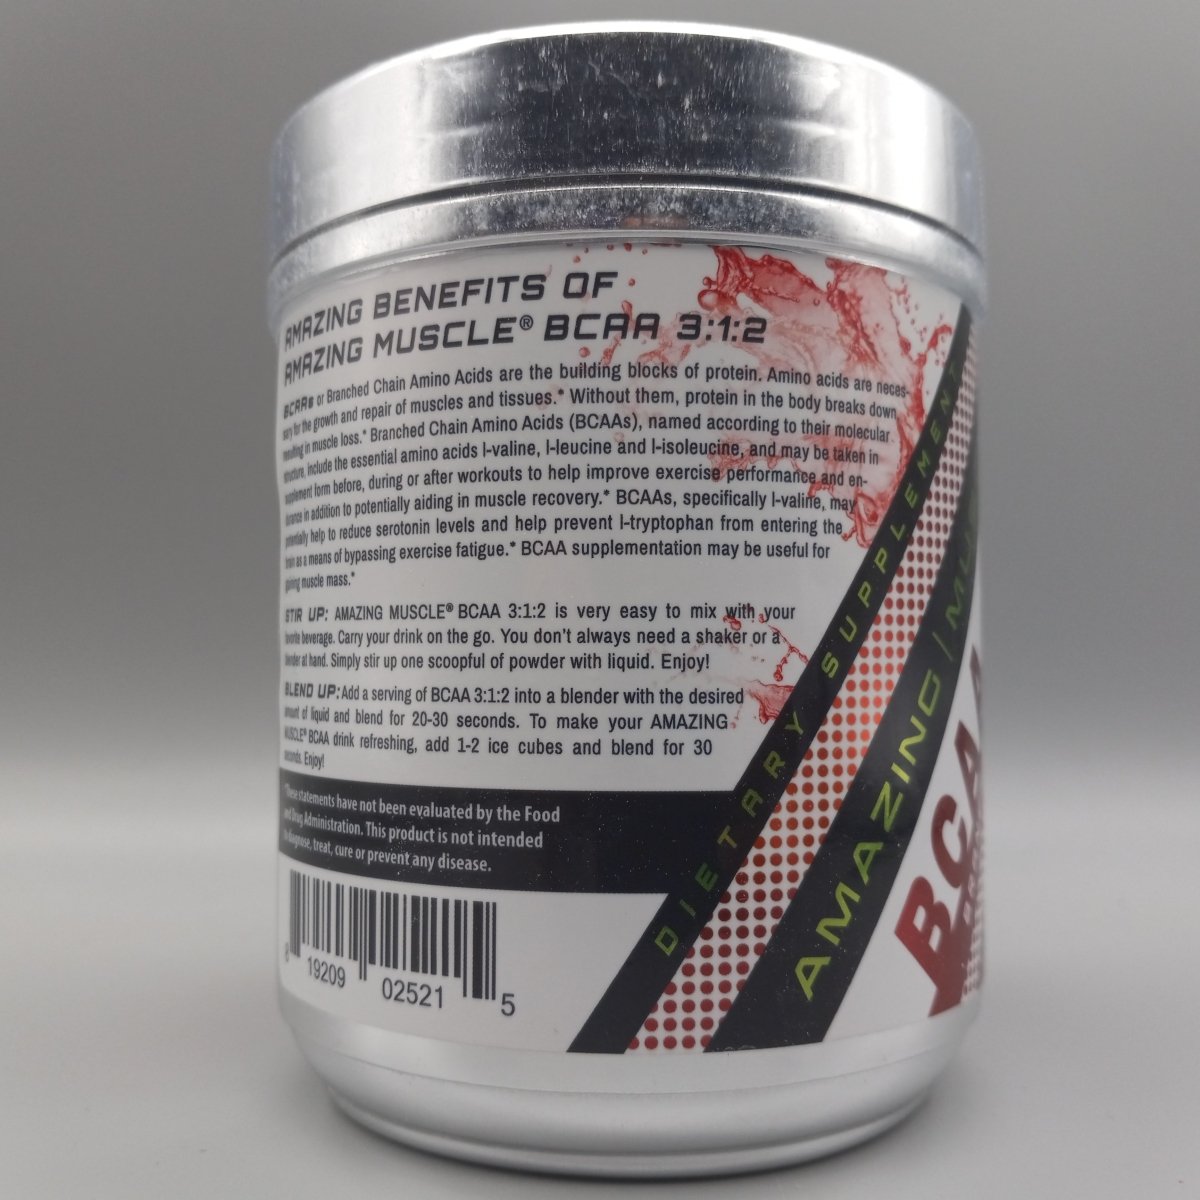 Amazing Muscle - BCAA 3:1:2 - 60 Servings - 468g - Fruit Punch